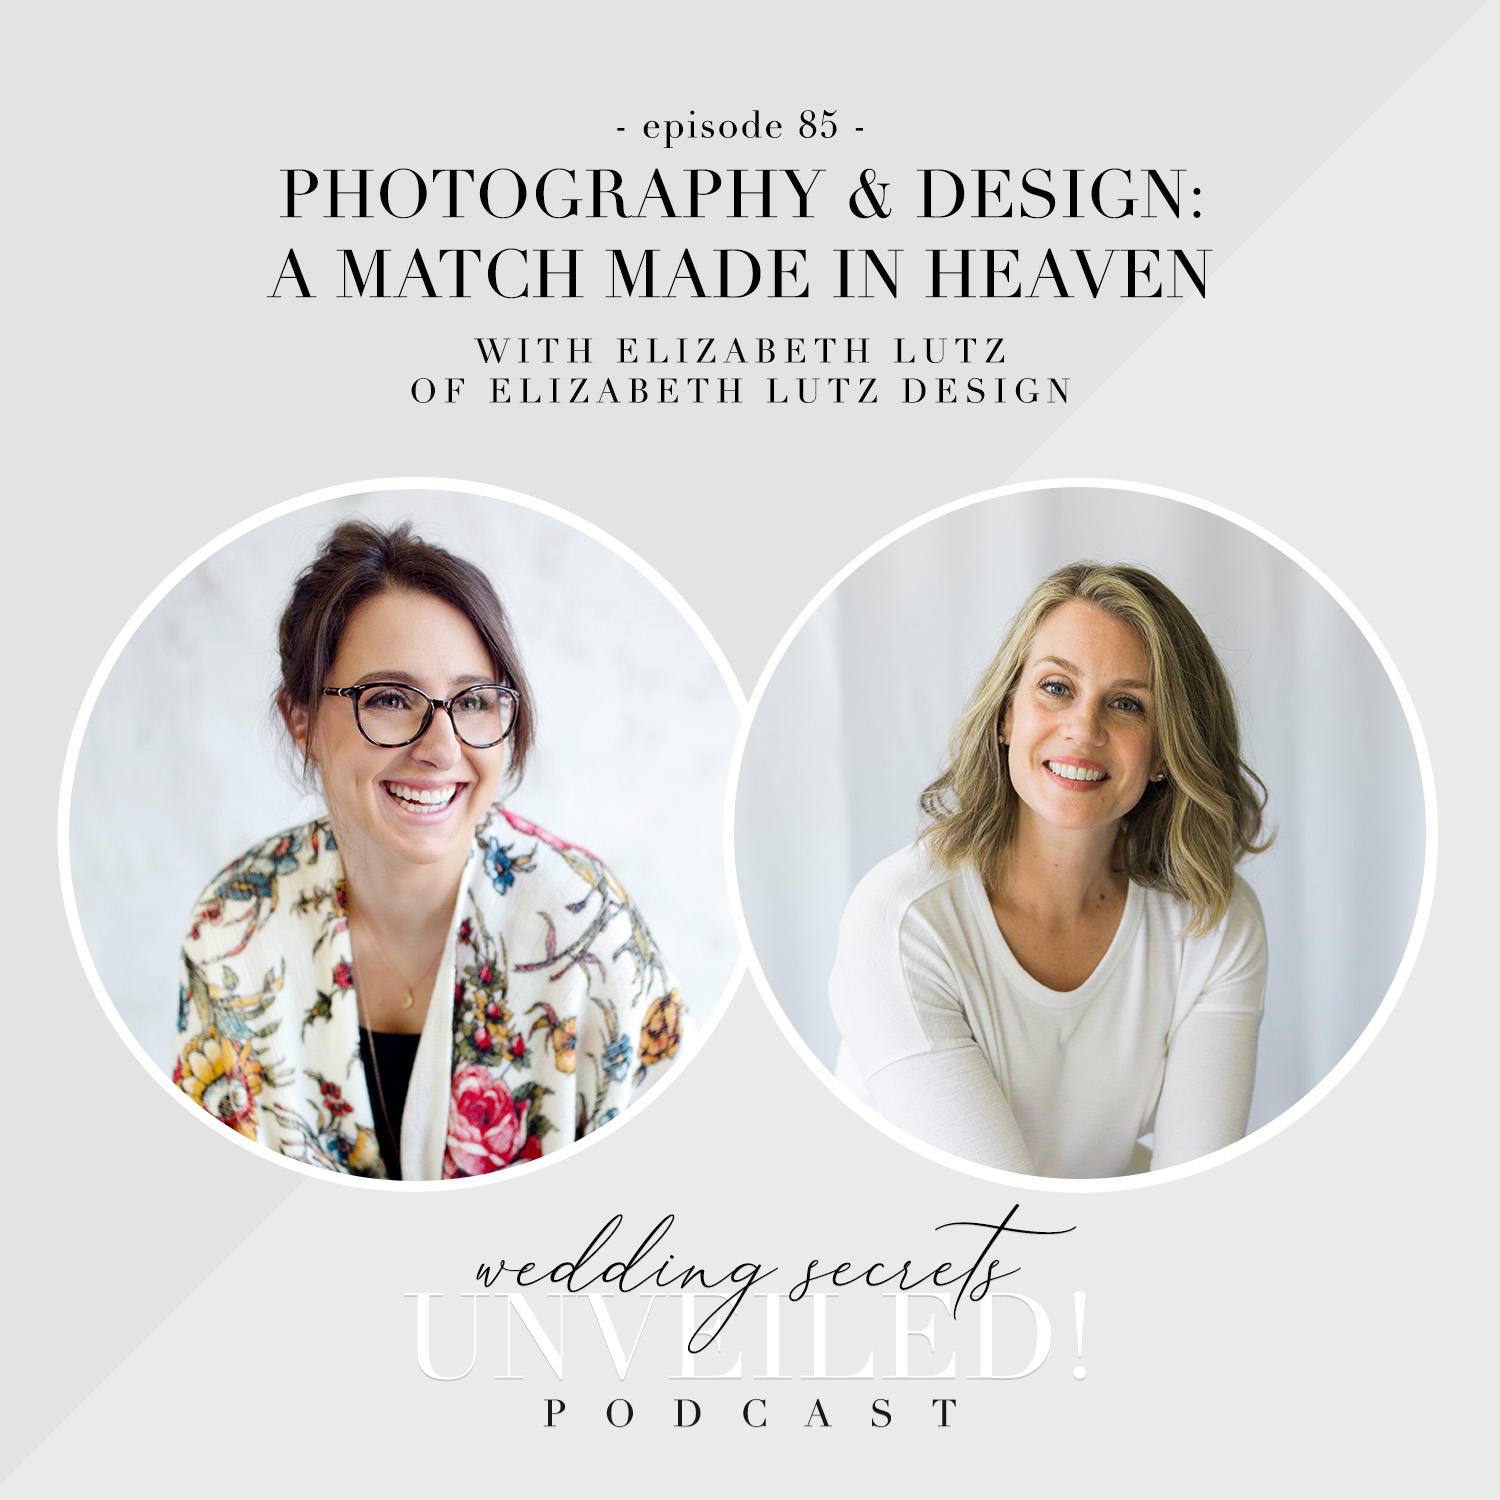 Photography and Wedding Design: designer Elizabeth Lutz shares tips to hire the perfect photographer for your wedding day